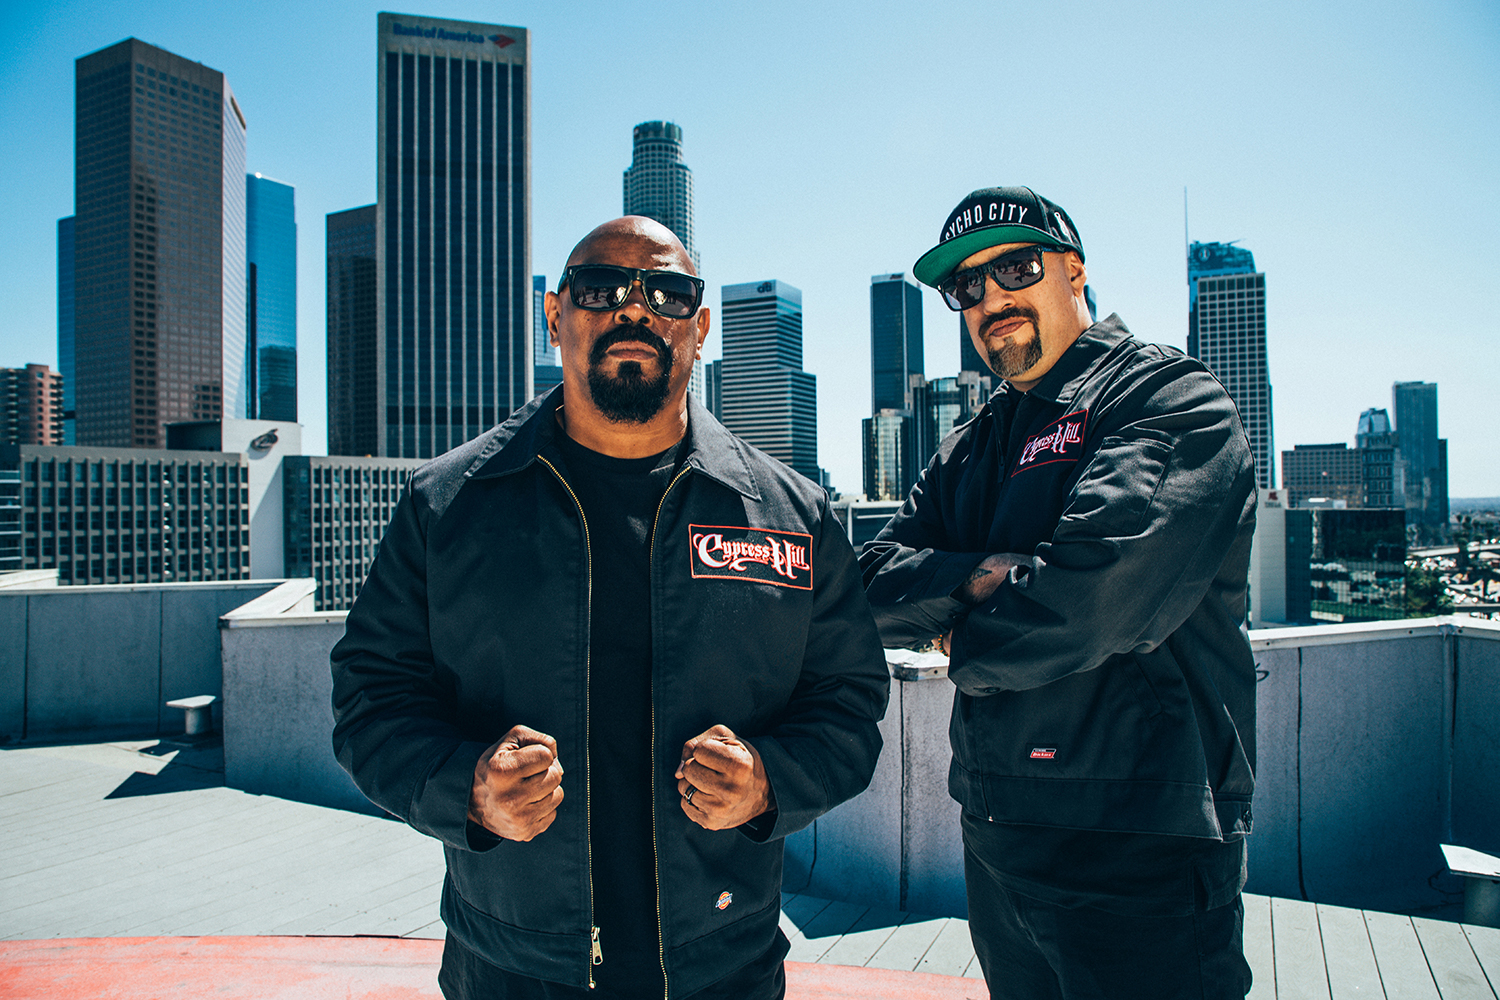 BMG signs Cypress Hill, reveal details of new album, “They kickstarted Latin hip hop”